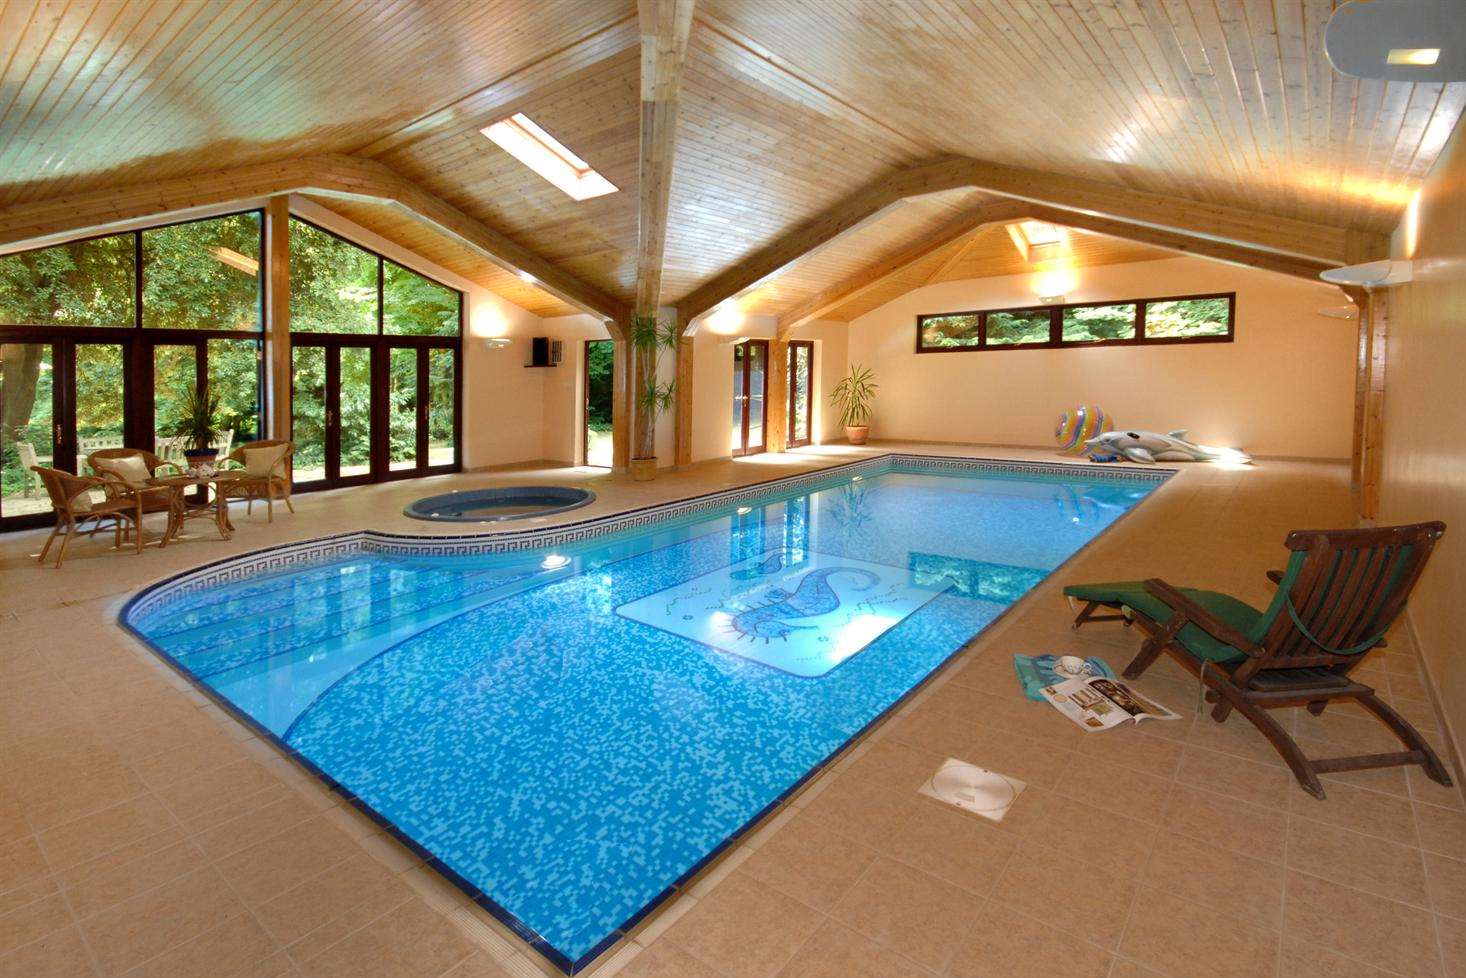 The pool area at the property near Sandwich